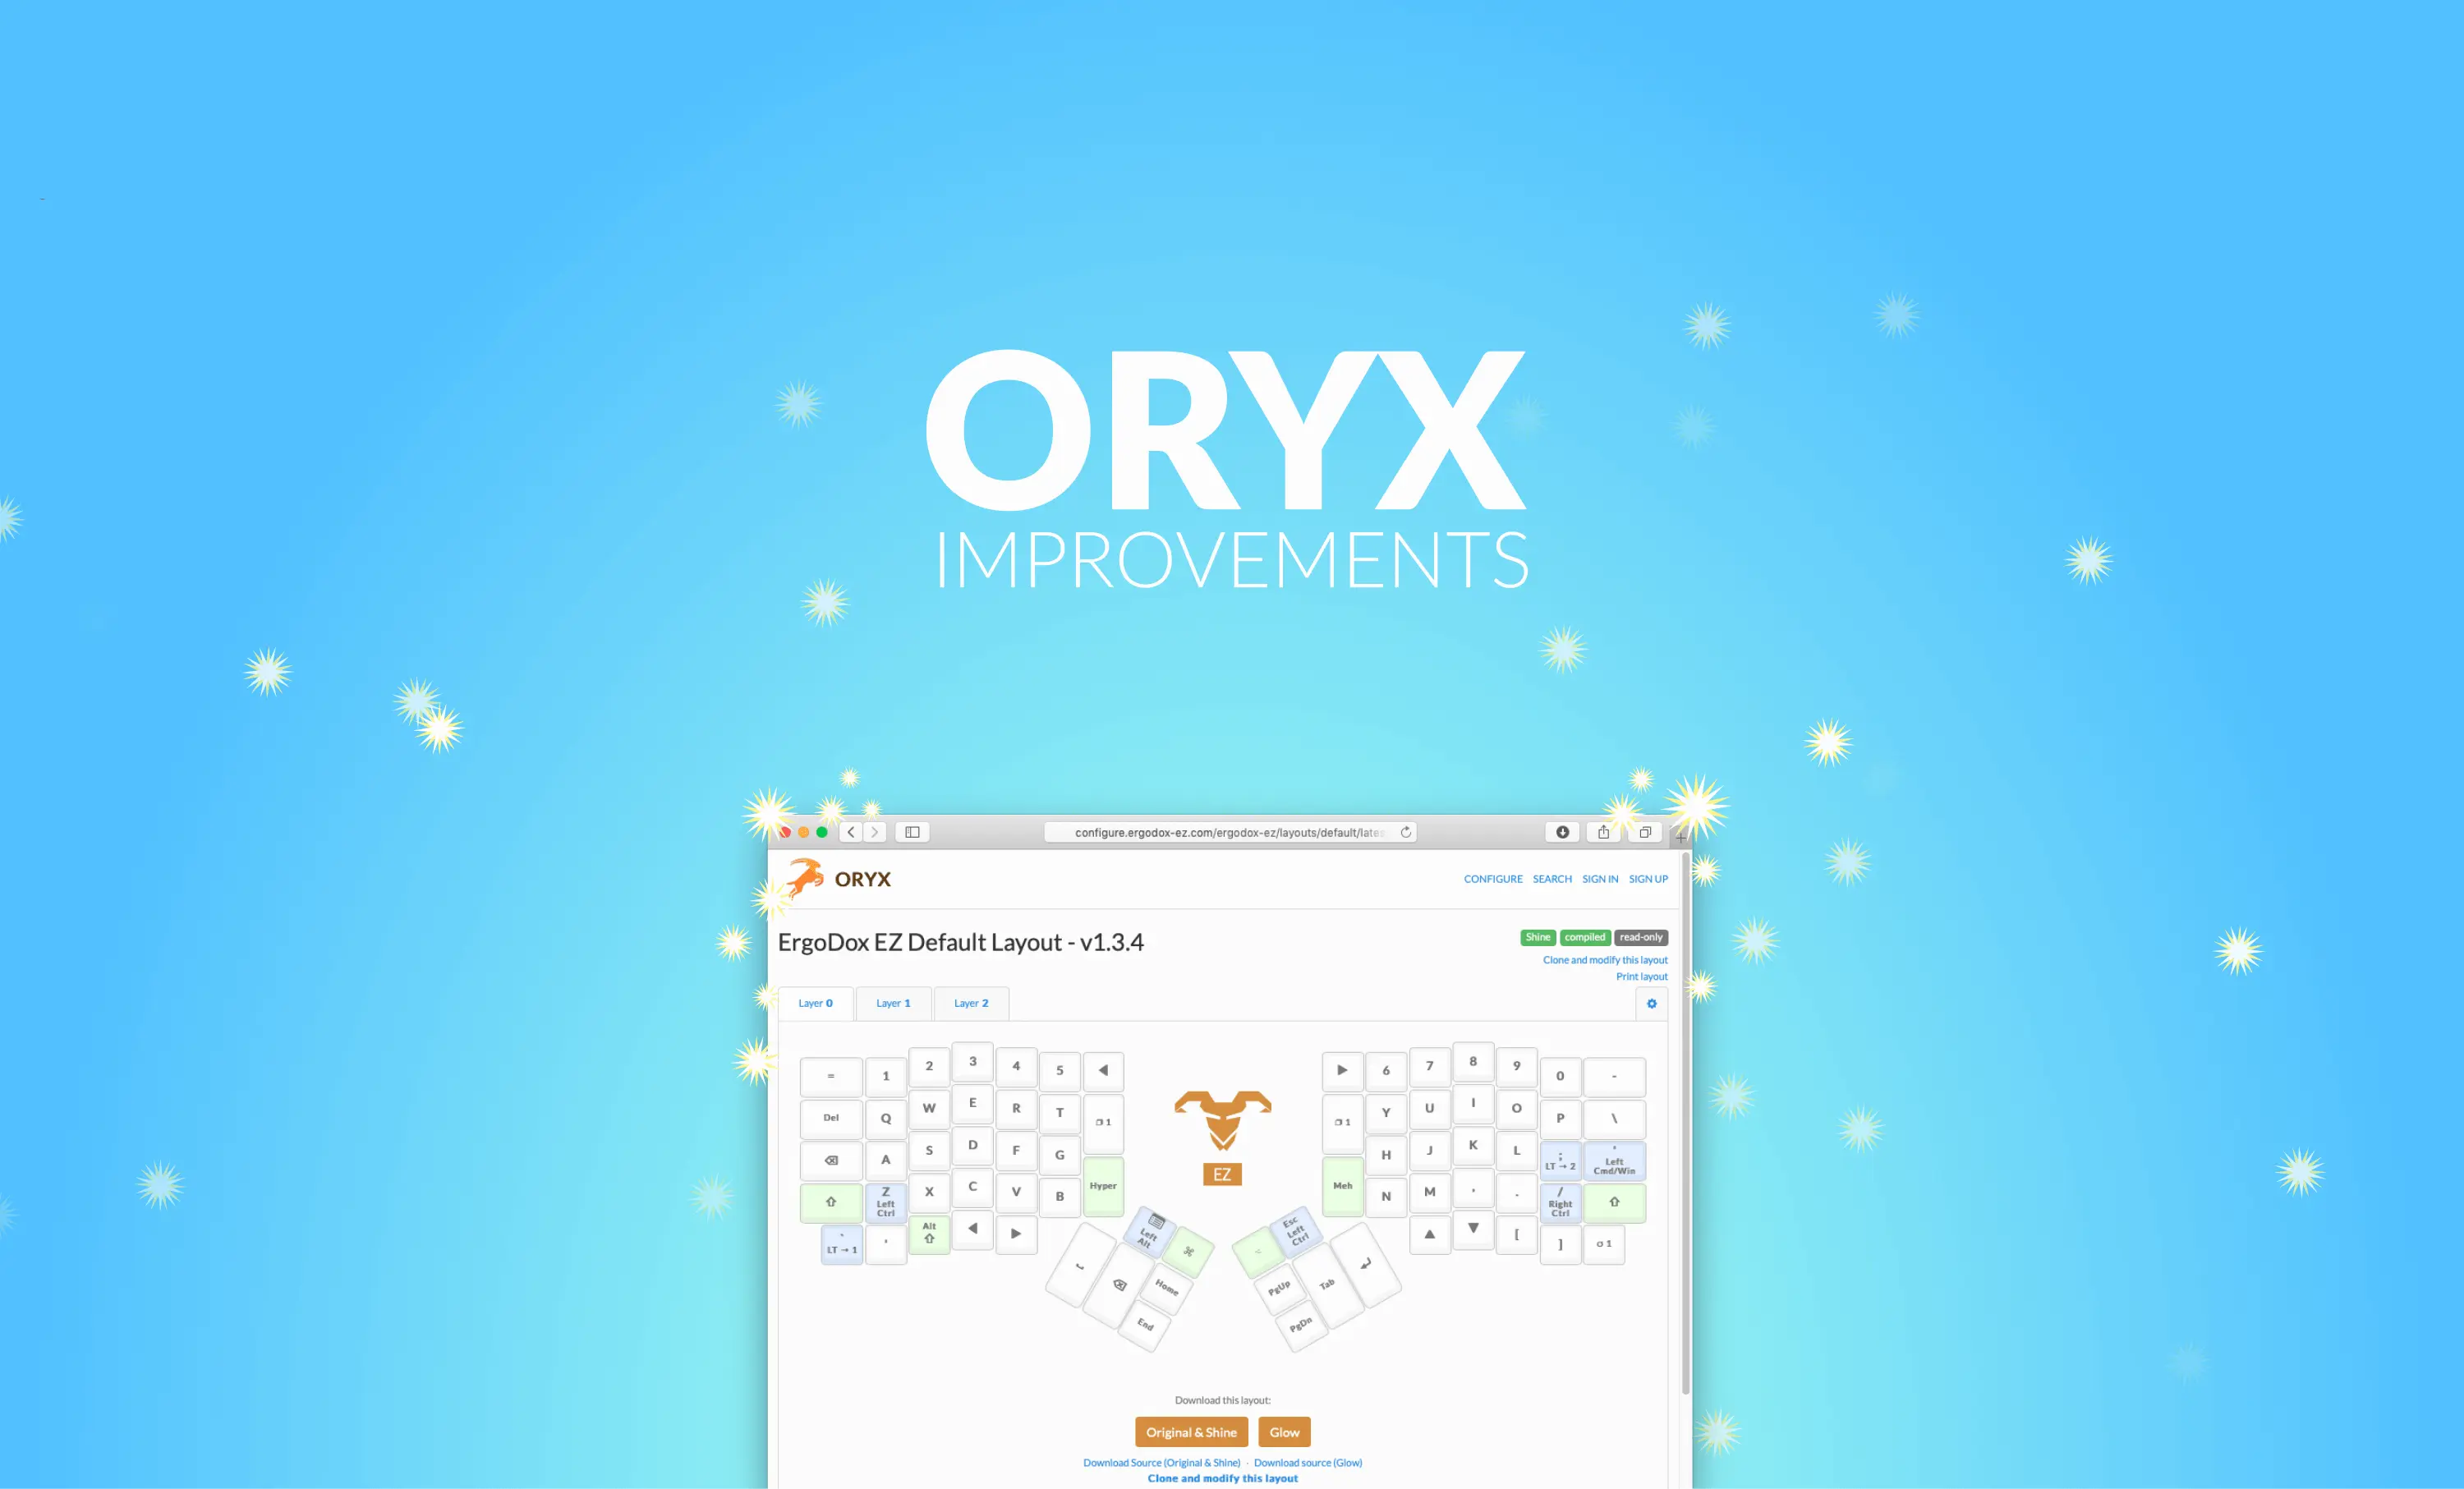 What’s New With Oryx: I18n, UI Improvements, and More.